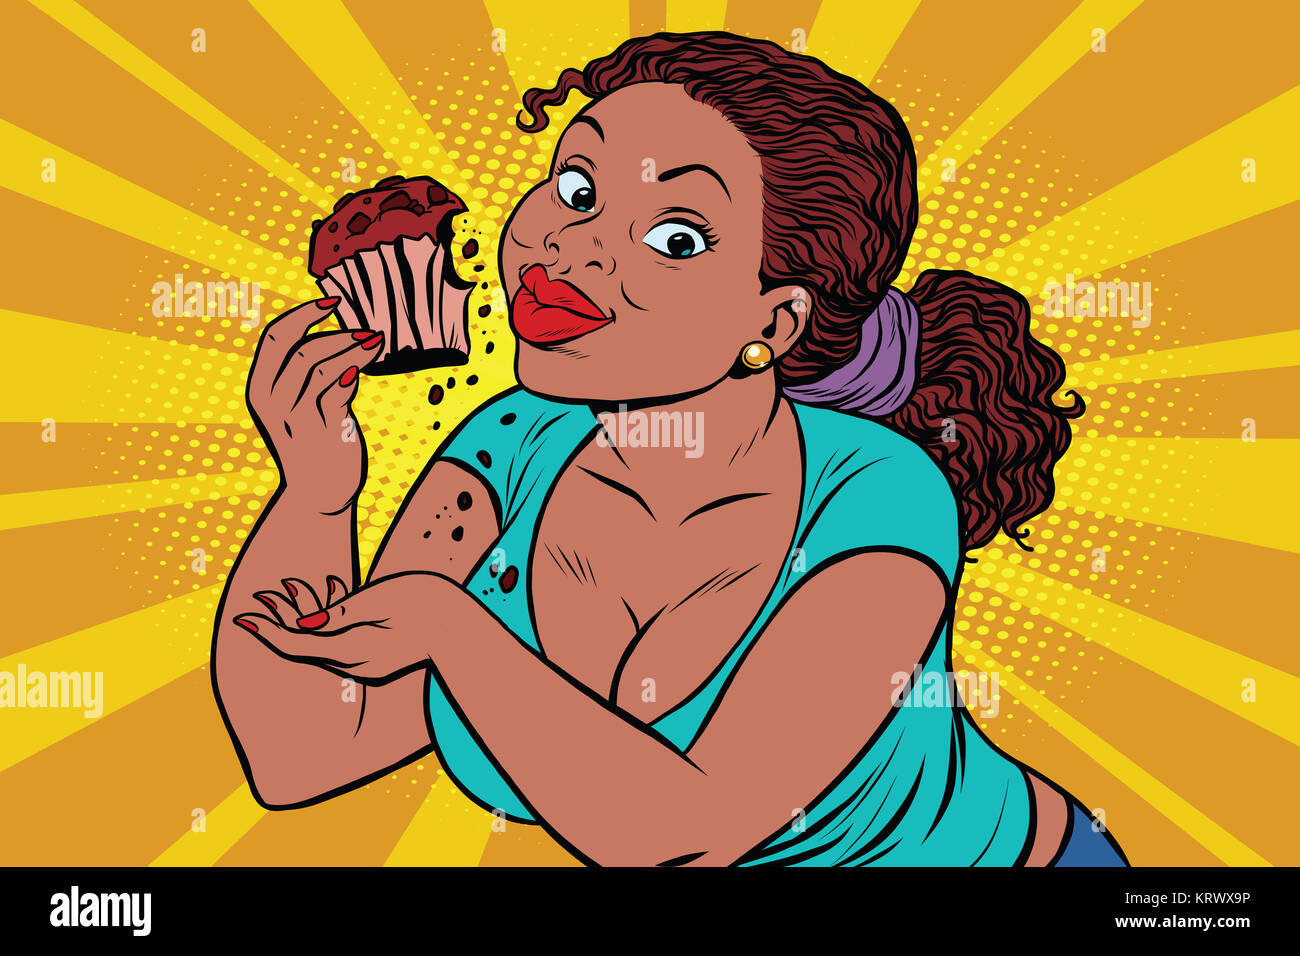 Diet concept woman eating cupcake Stock Photo